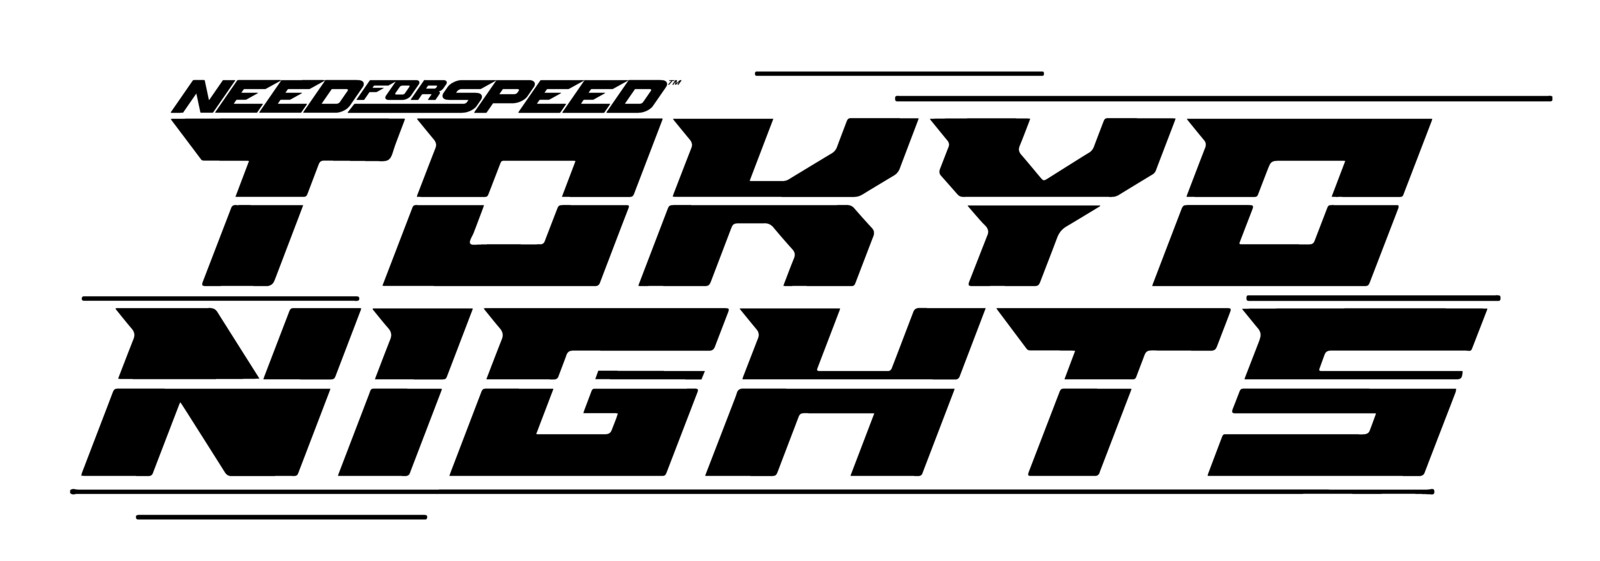 Need for Speed Tokyo Nights (based on the logo made by JvyPennant)